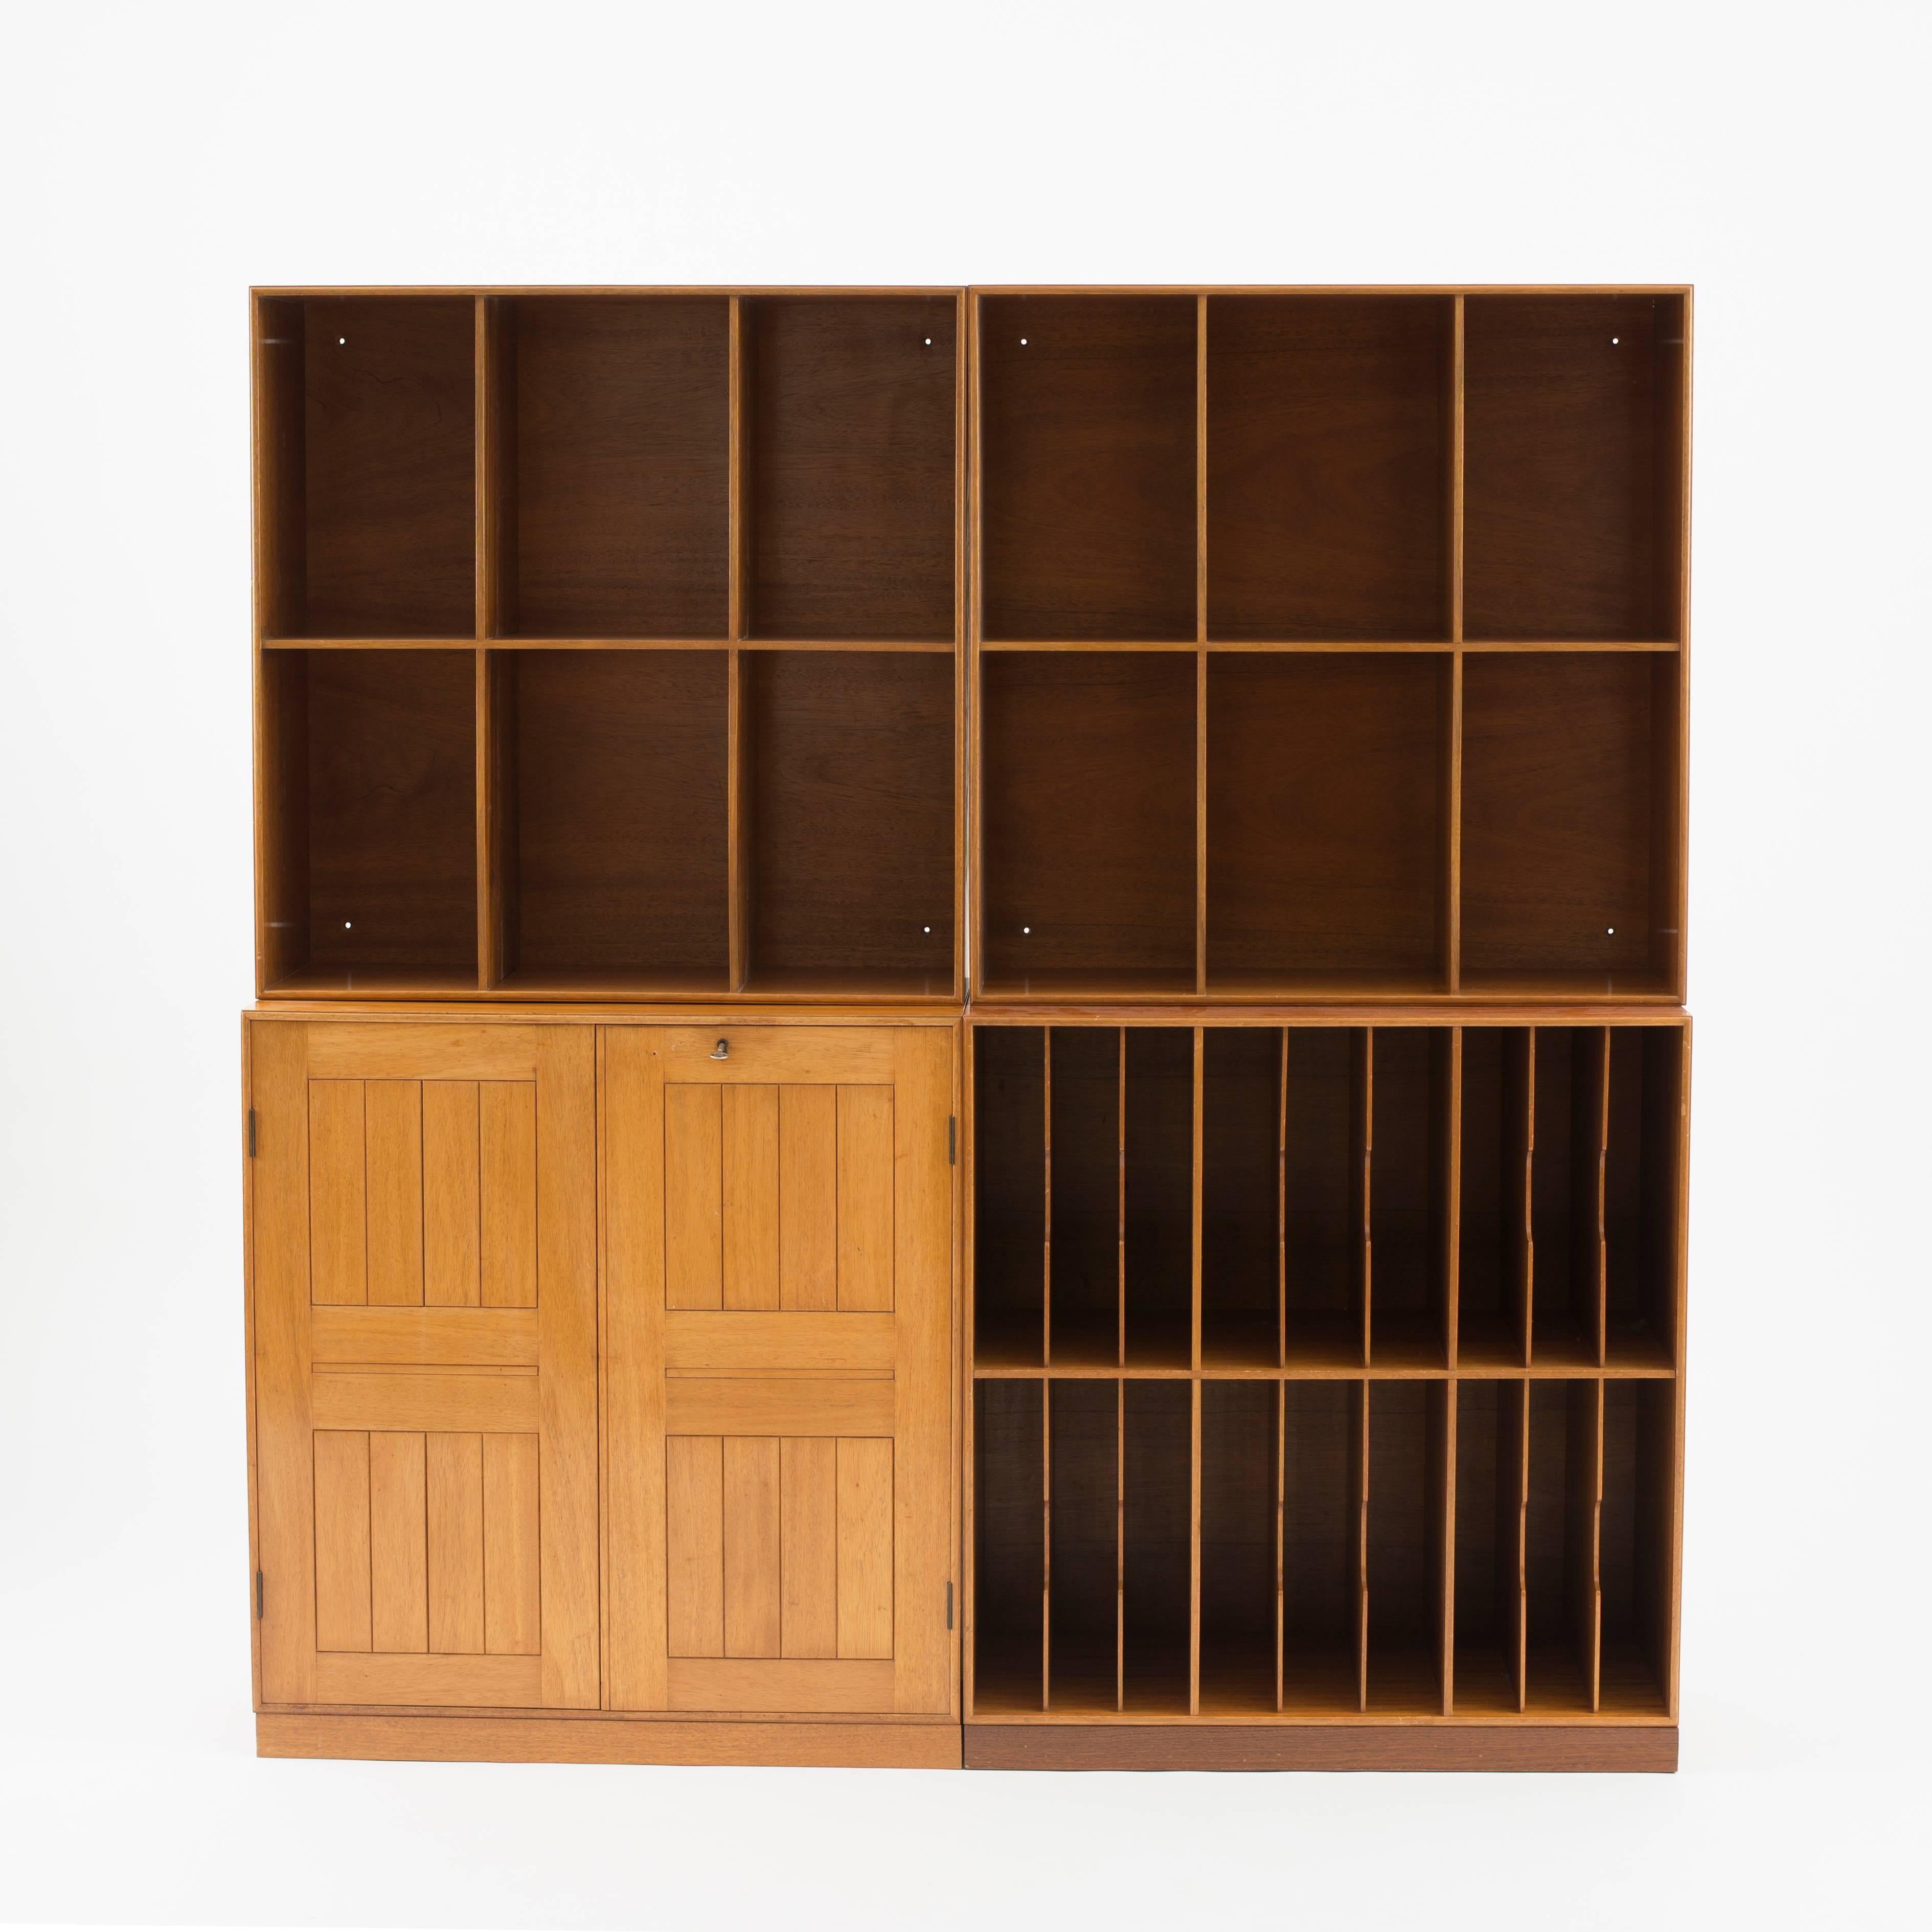 Mogens Koch cabinets and bookcases in Mahogany. Executed by Rud. Rasmussen.

Reverse with manufacturer's paper label RUD. RASMUSSEN/SNEDKERIER/45 NØRREBROGADE/KØBENHAVN.